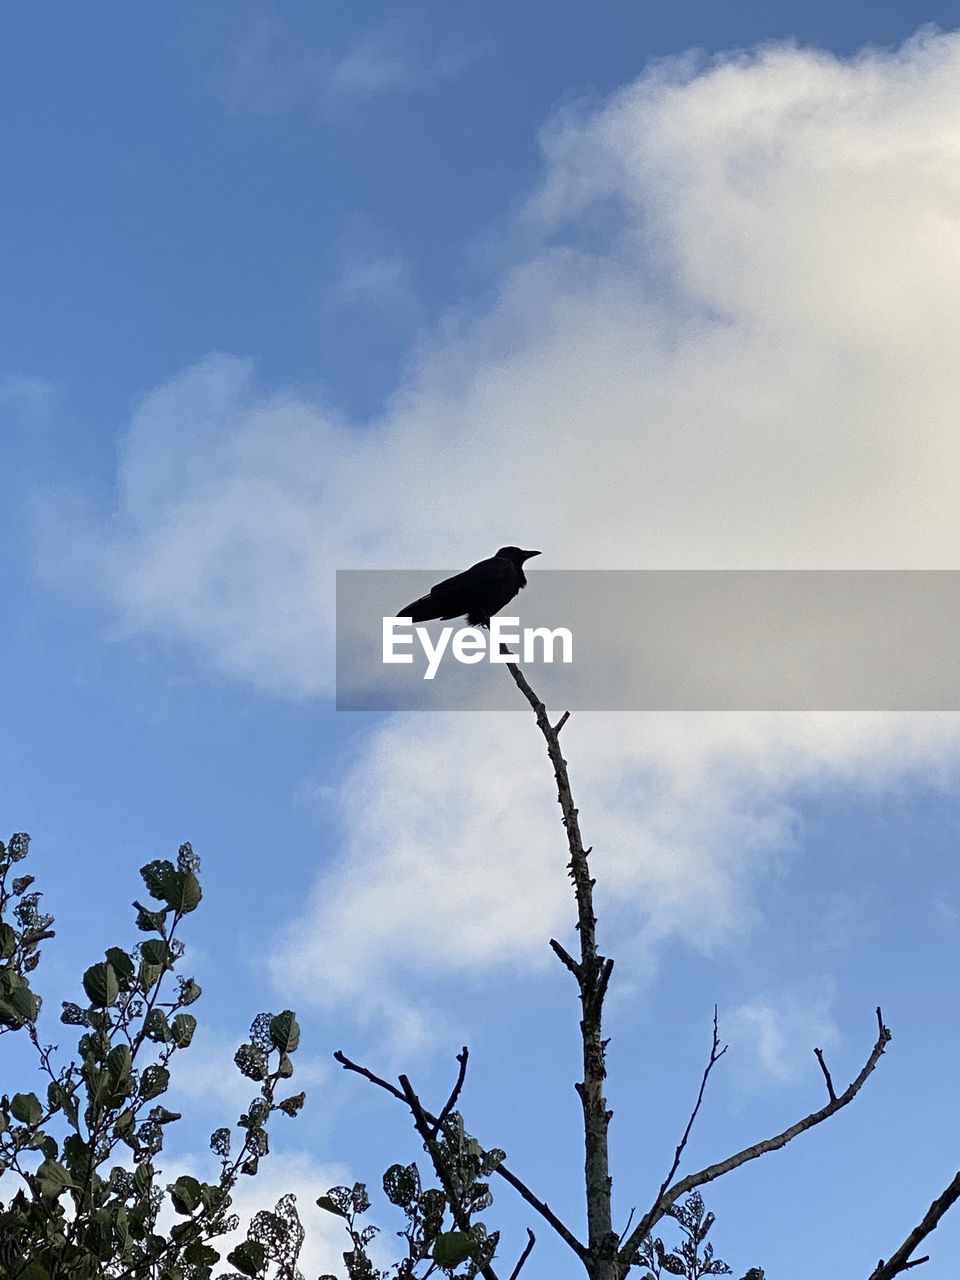 sky, cloud, nature, blue, tree, low angle view, bird, branch, no people, animal, day, outdoors, plant, animal themes, sunlight, animal wildlife, silhouette, flying, wildlife, flower